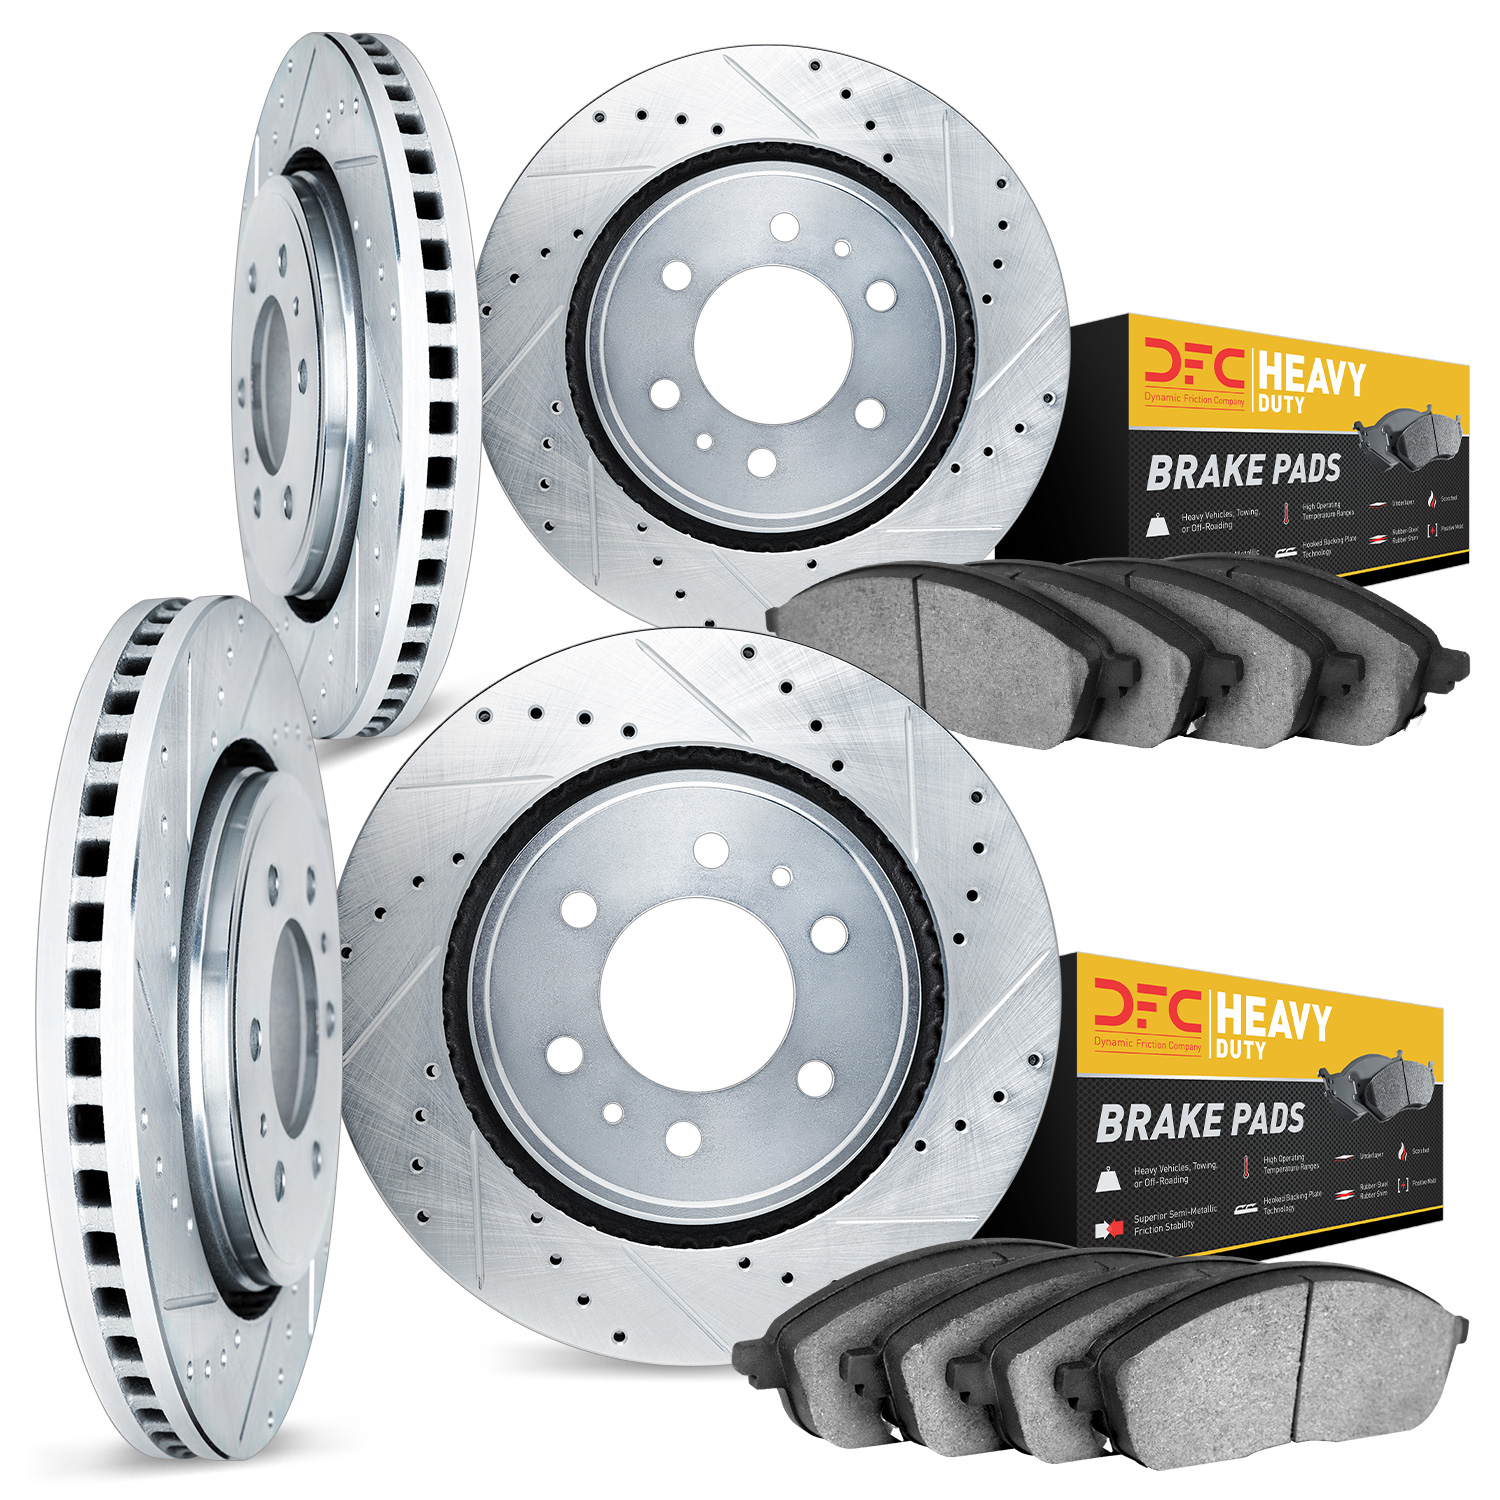 7204-99101 Drilled/Slotted Rotors w/Heavy-Duty Brake Pads Kit [Silver], 2010-2017 Ford/Lincoln/Mercury/Mazda, Position: Front an